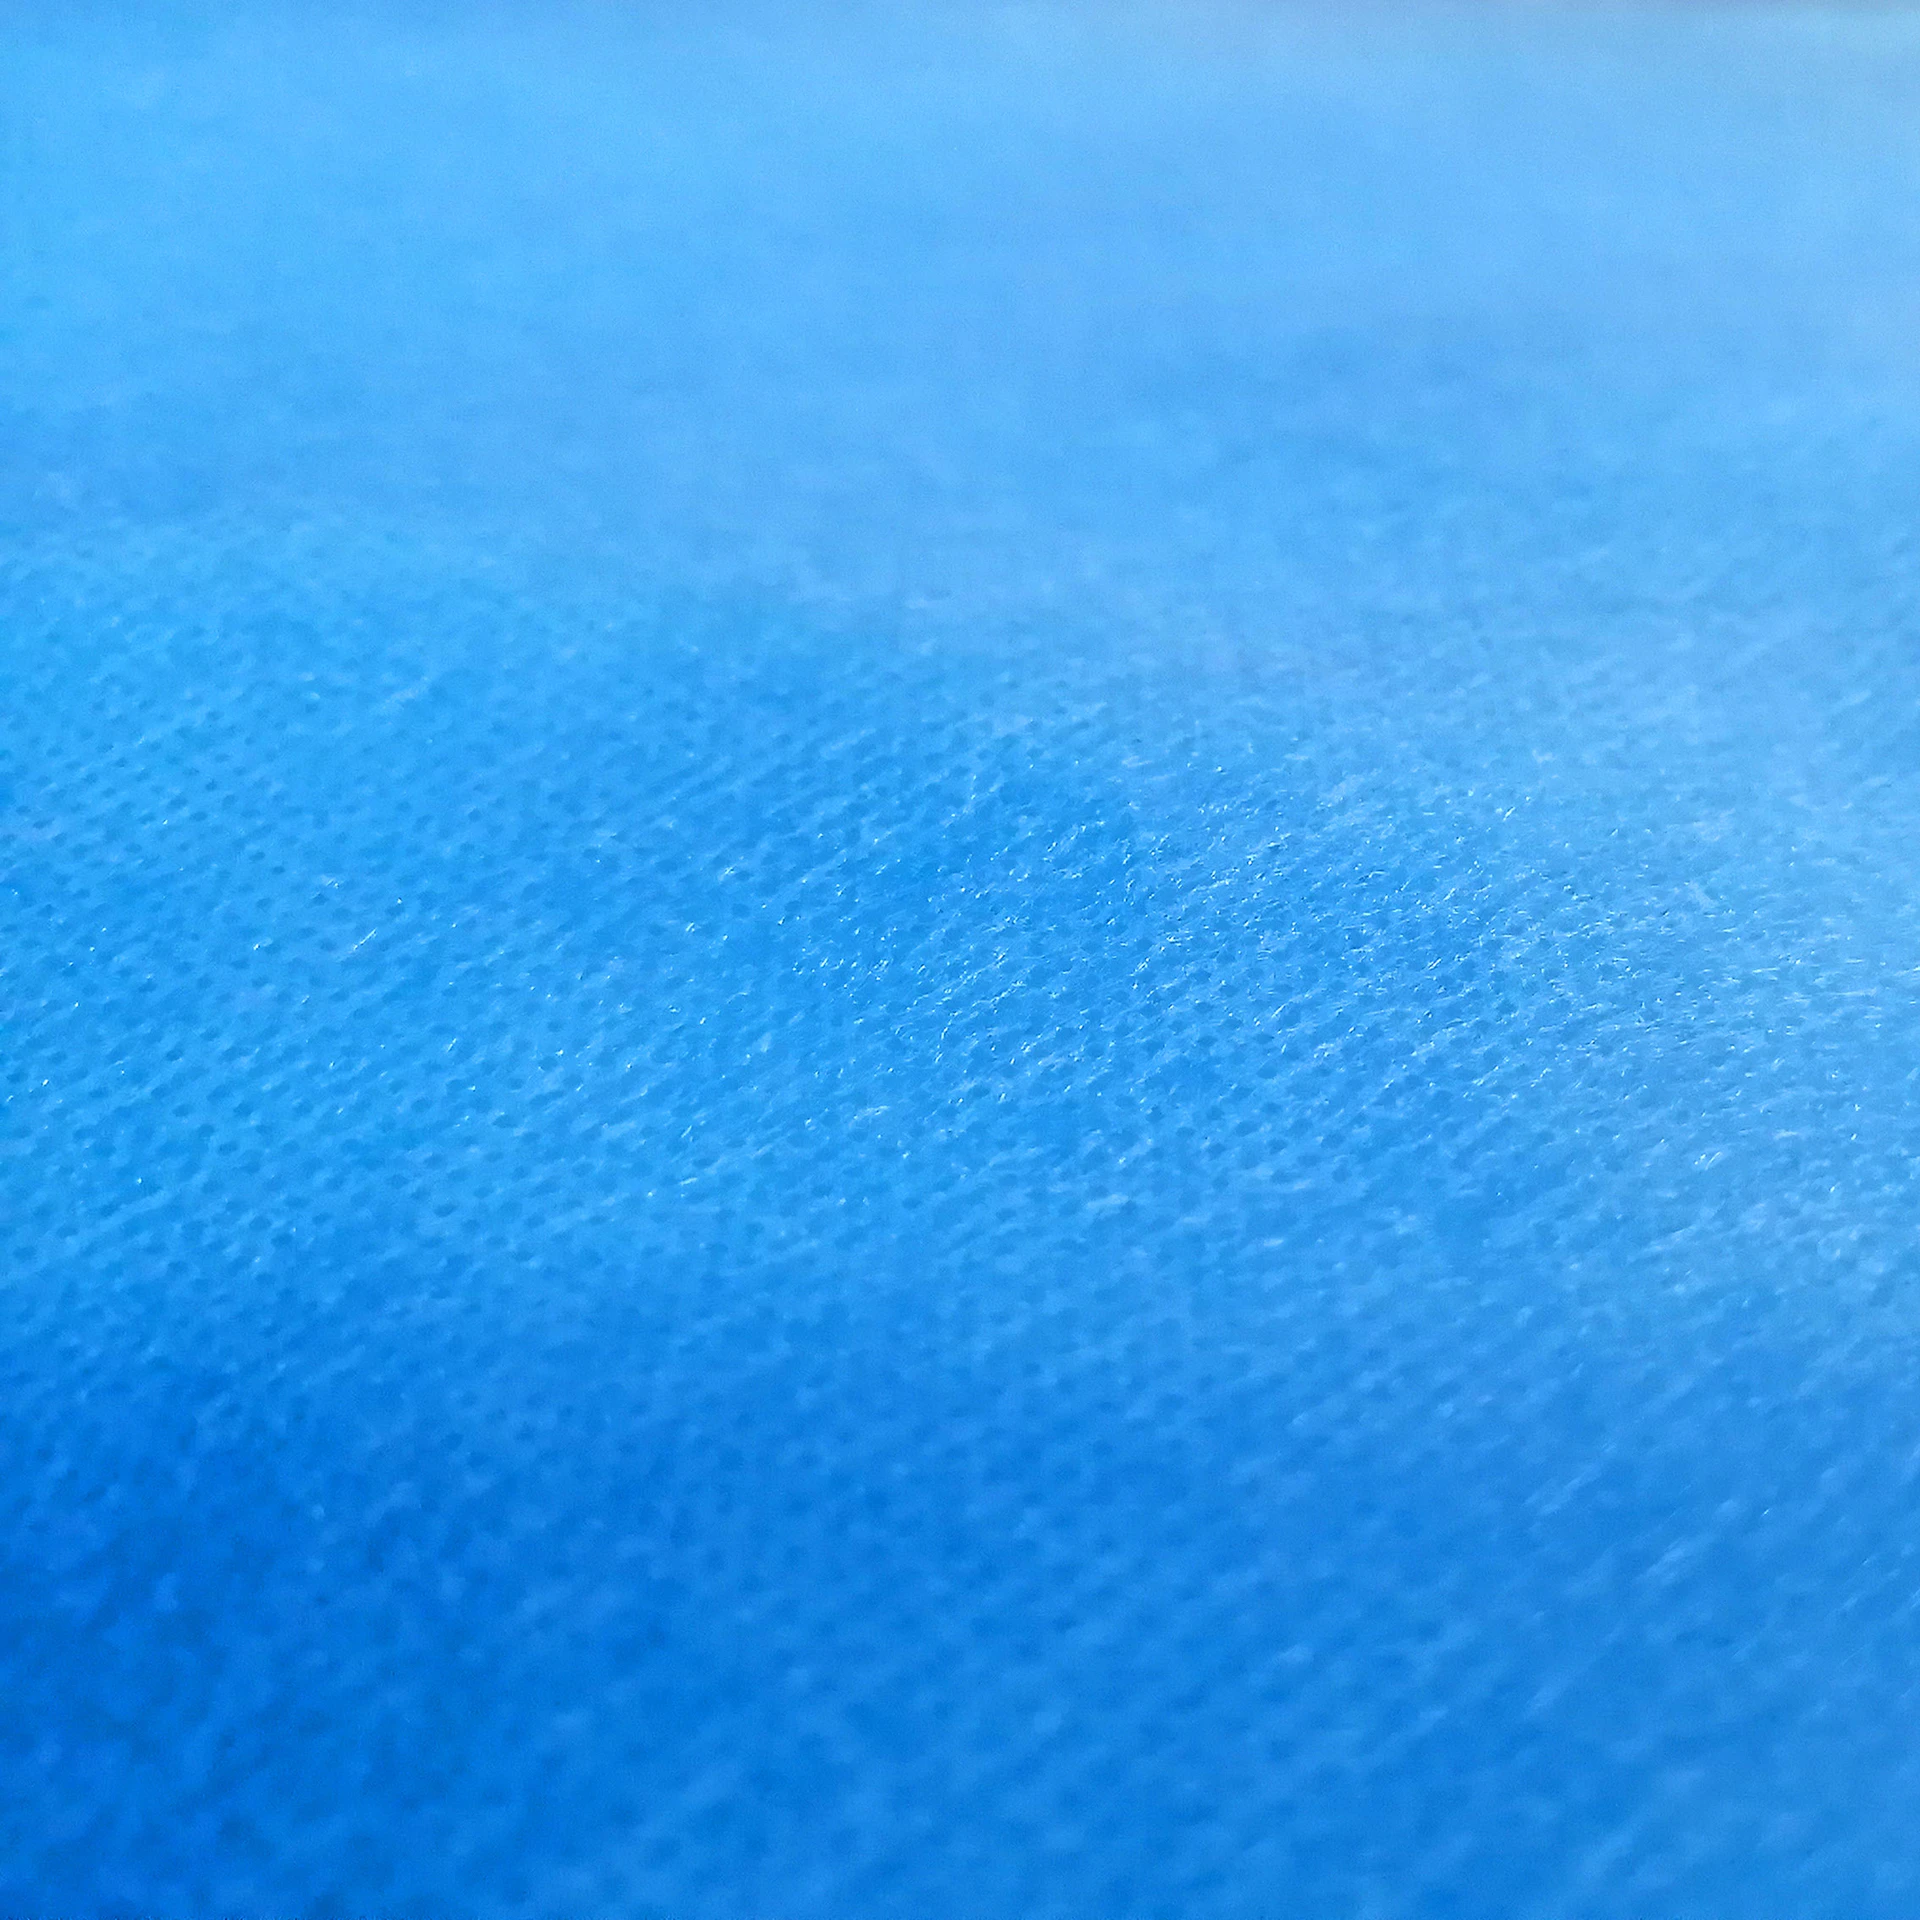 mask nonwoven fabric used for medical products